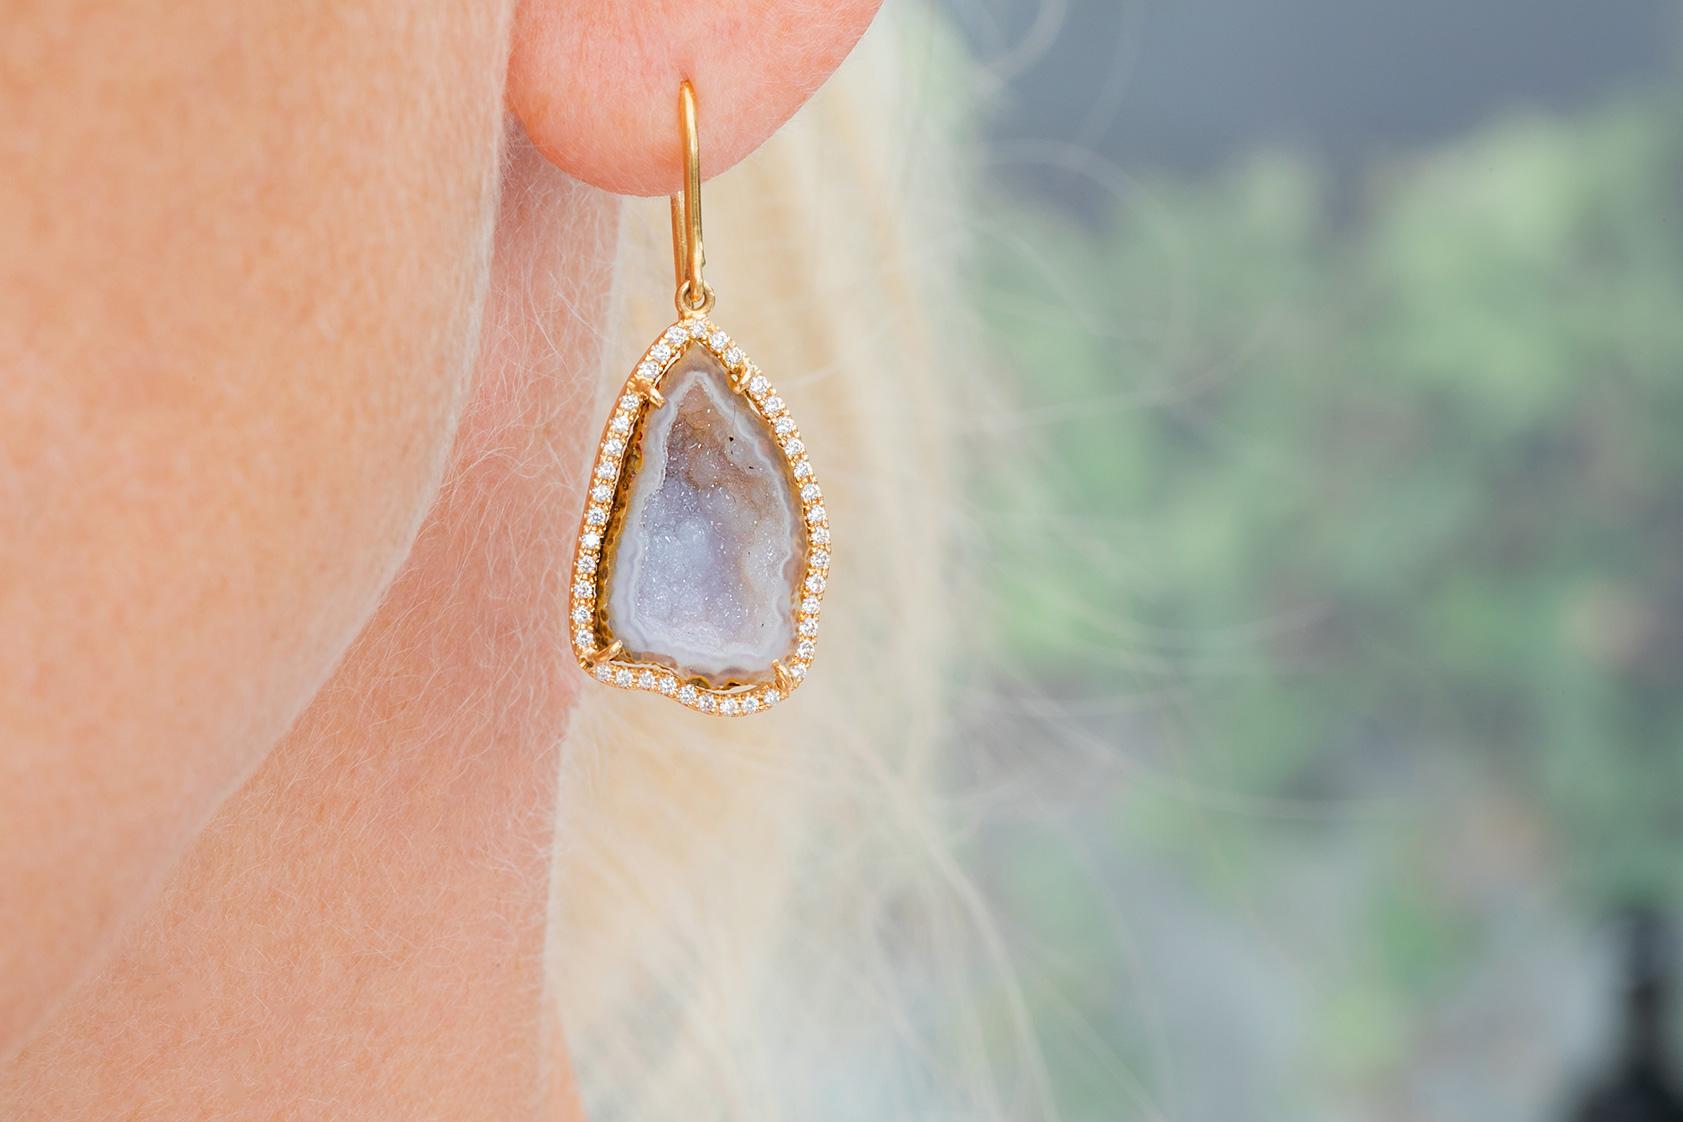 Beauty's!
These light pink/lila agate geode earrings are handcrafted from 18k rose gold and encrusted with O.48 carat of diamonds.
We think they make a thoughtful gift for the woman who has an elegant style of fashion.


